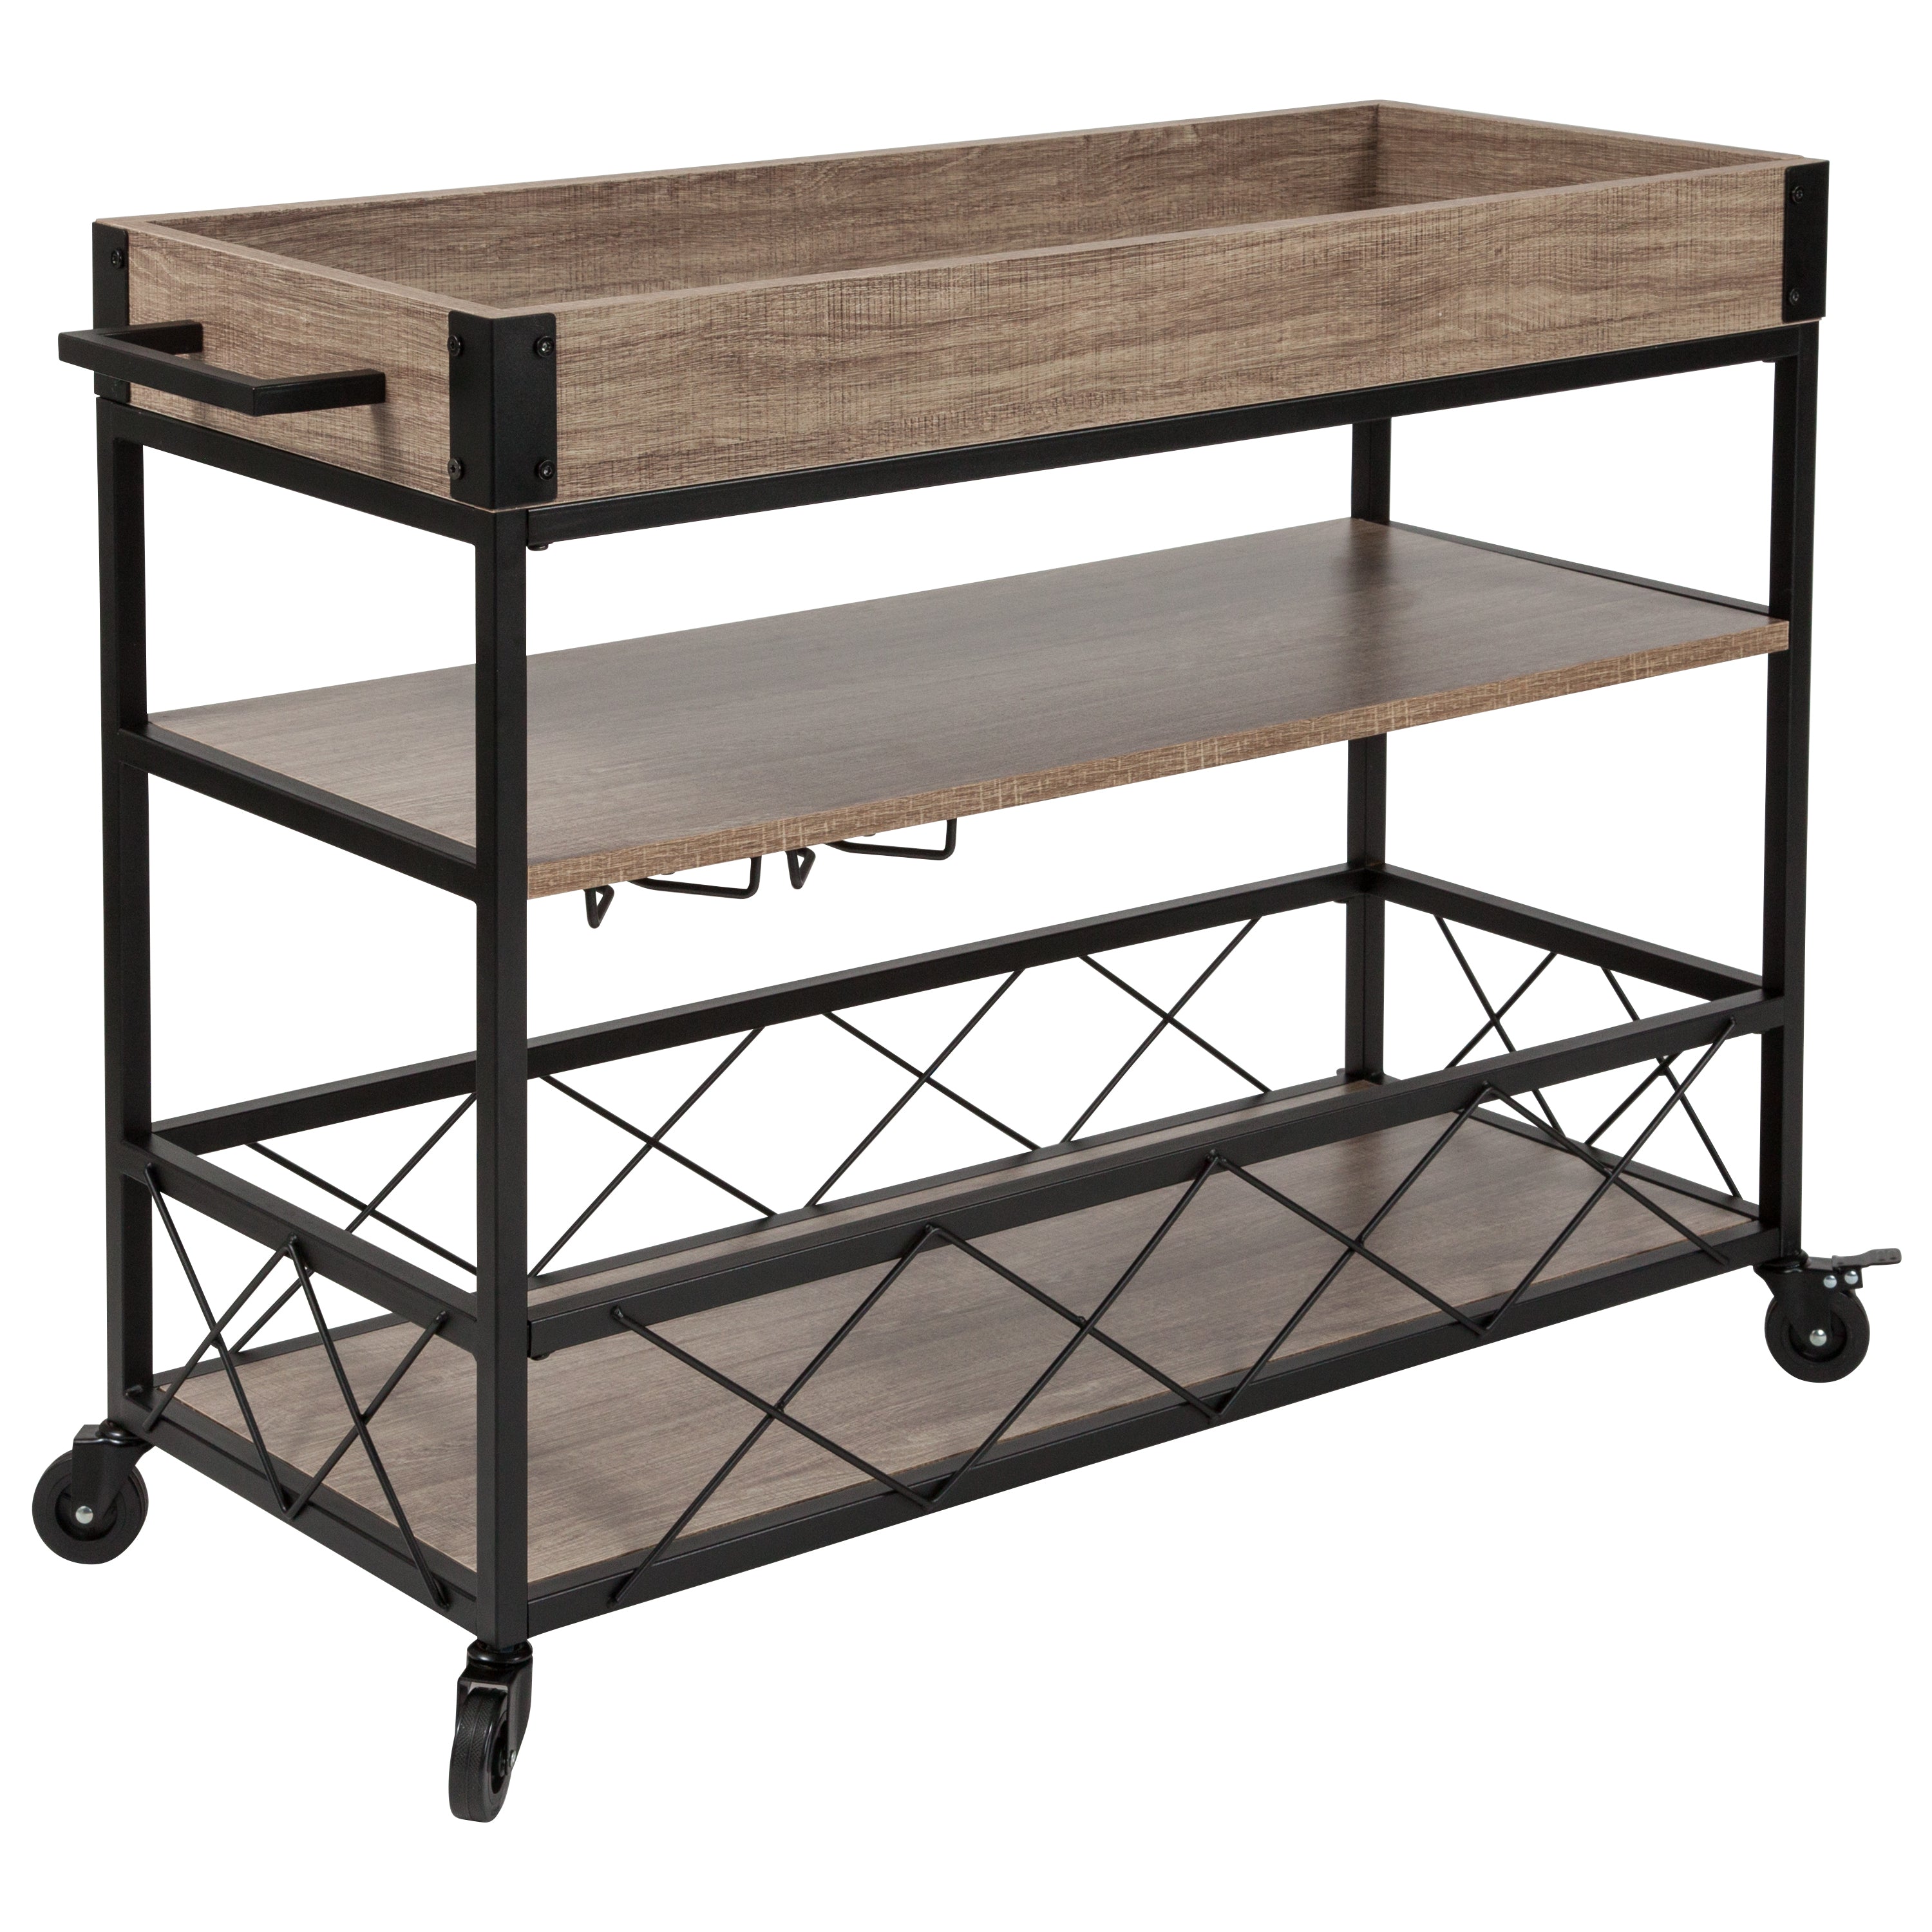 Buckhead Distressed Wood and Iron Kitchen Serving and Bar Cart with Wine Glass Holders-Serving Cart-Flash Furniture-Wall2Wall Furnishings